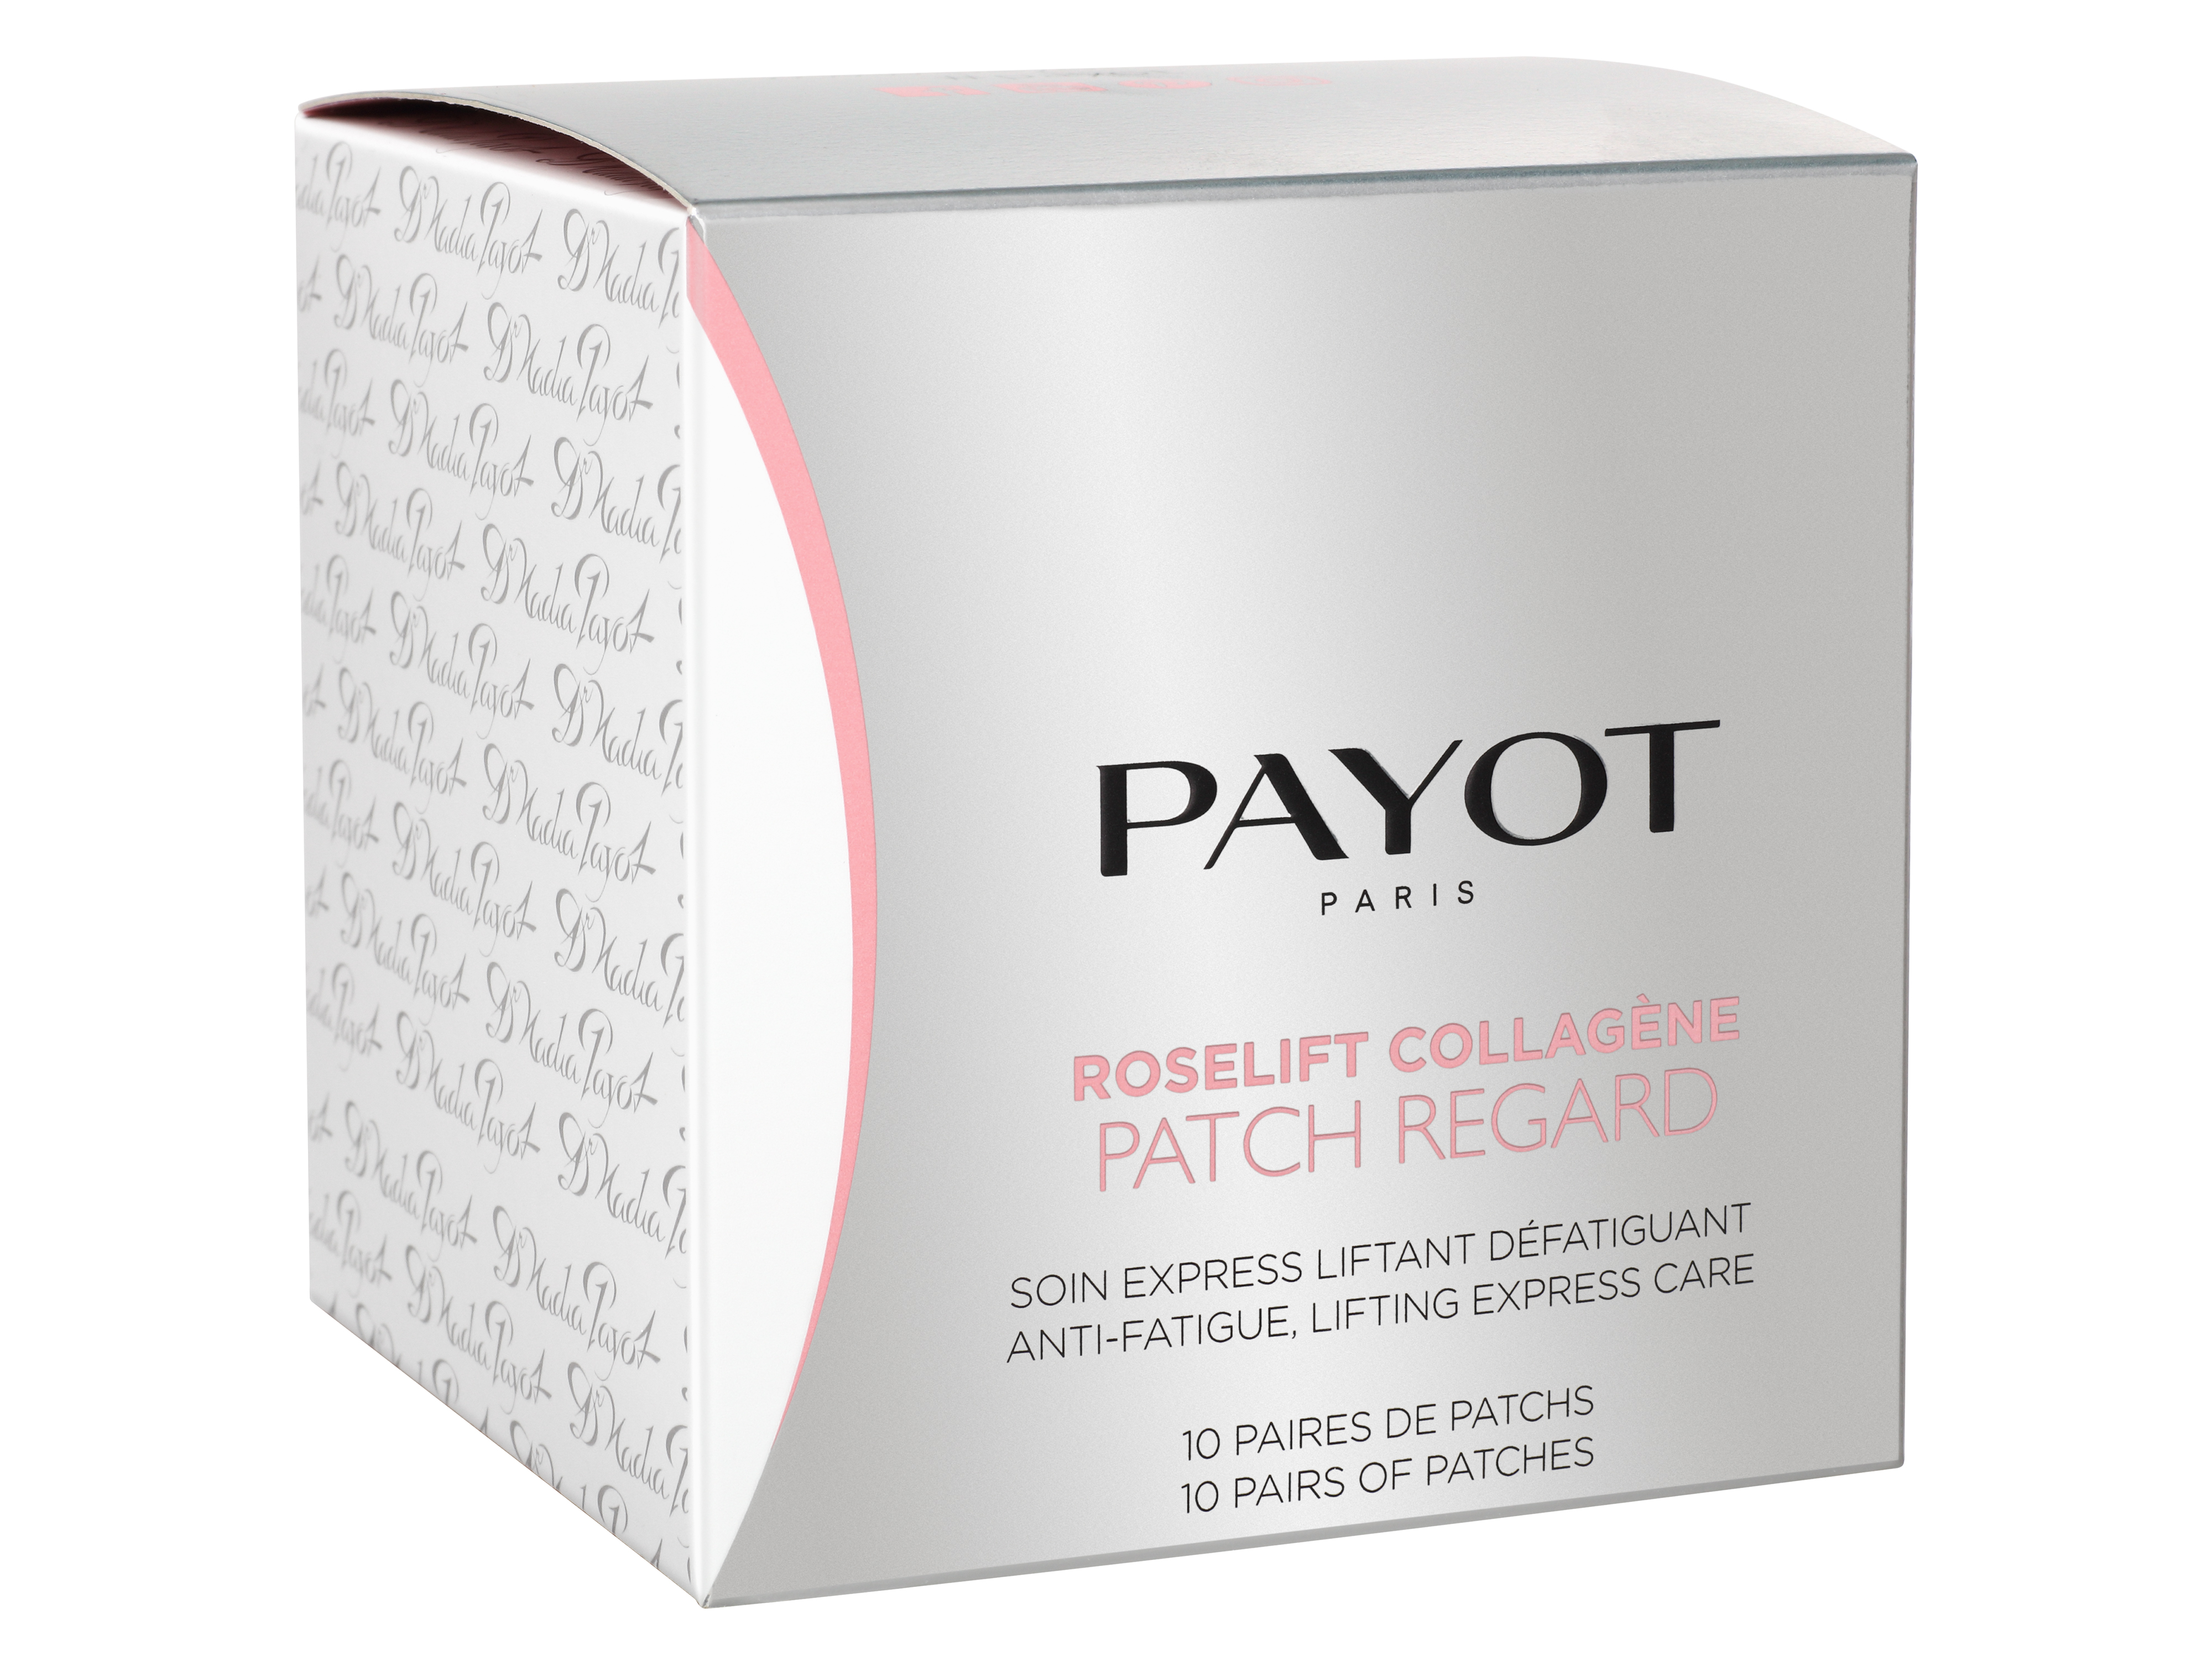 Payot Roselift Collagene Patch Yeux, 10 x 2 øyemasker